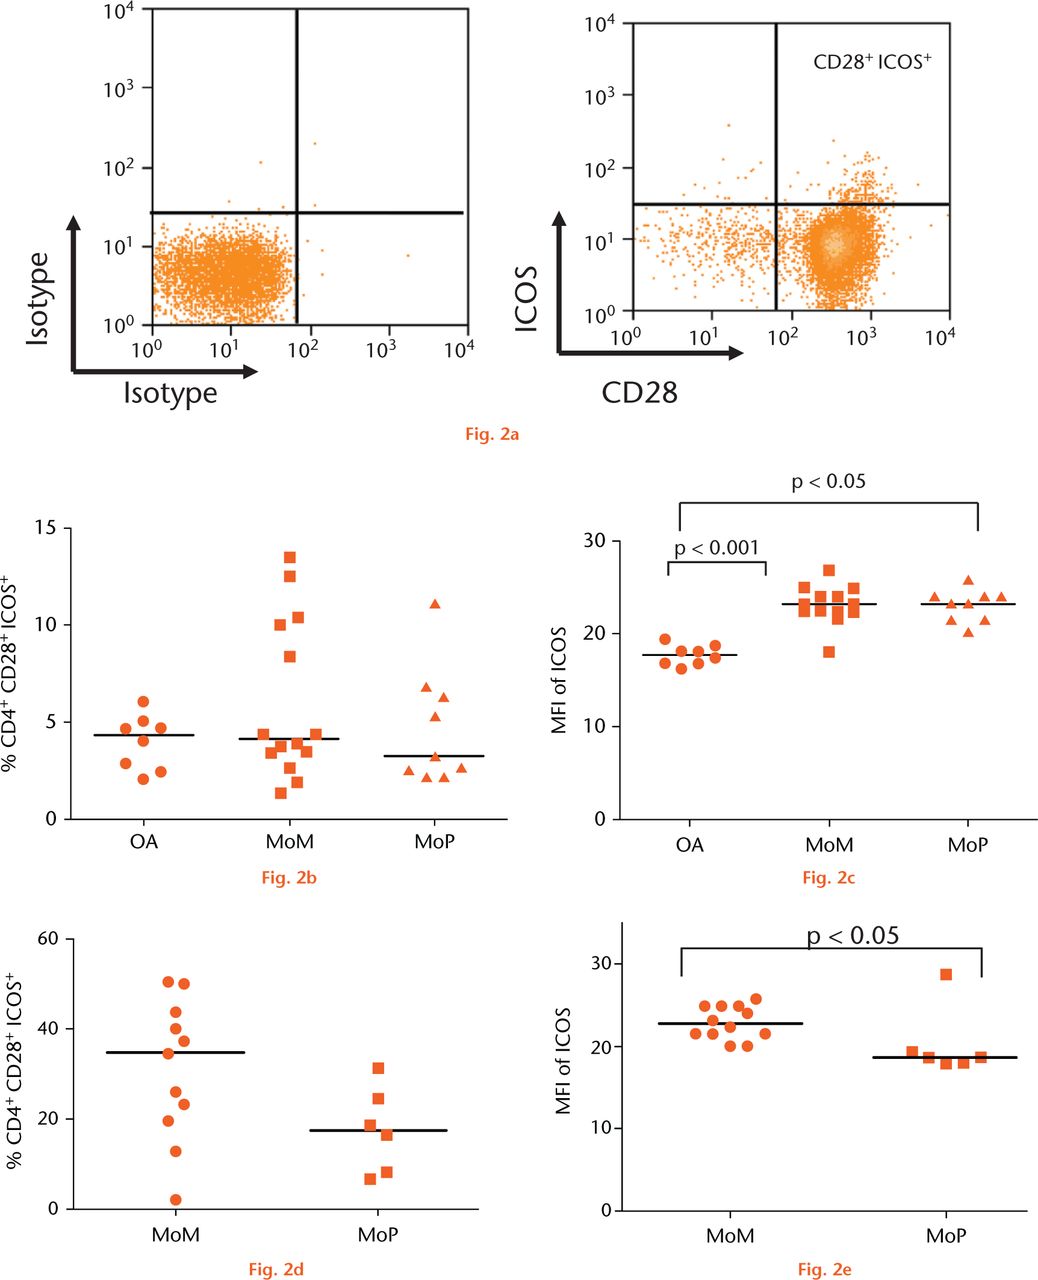  
            Graphs showing the expression of inducible co-stimulator (ICOS) on CD4+ T cells: (a) Expression of CD28 plotted against ICOS on CD3+ CD4+ T-cells. b) Pooled data of frequency of CD4+ CD28+ T-cells expressing ICOS in the peripheral blood of a control group with osteoarthritis (OA) (n = 8), metal-on-metal (MoM )hips (n = 14) and metal-on-polyethylene (MoP) hips (n = 9). Horizontal lines indicate medians. c) Median fluorescence intensity (MFI) of ICOS in the peripheral blood of a control group with osteoarthritis (OA) (n = 8), MoM hips (n = 14) and MoP hips (n = 9). Horizontal lines indicate medians. d) The frequency of CD4+CD28+ICOS+ T-cells in the synovial fluid of patients with MoM (n = 11) and MoP hips (n = 6). Horizontal lines indicate medians. e) MFI of ICOS on CD4+CD28+ T-cells in the synovial fluid of patients with MoM (n = 11) and MoP hips (n = 6). Horizontal lines indicate medians.
          